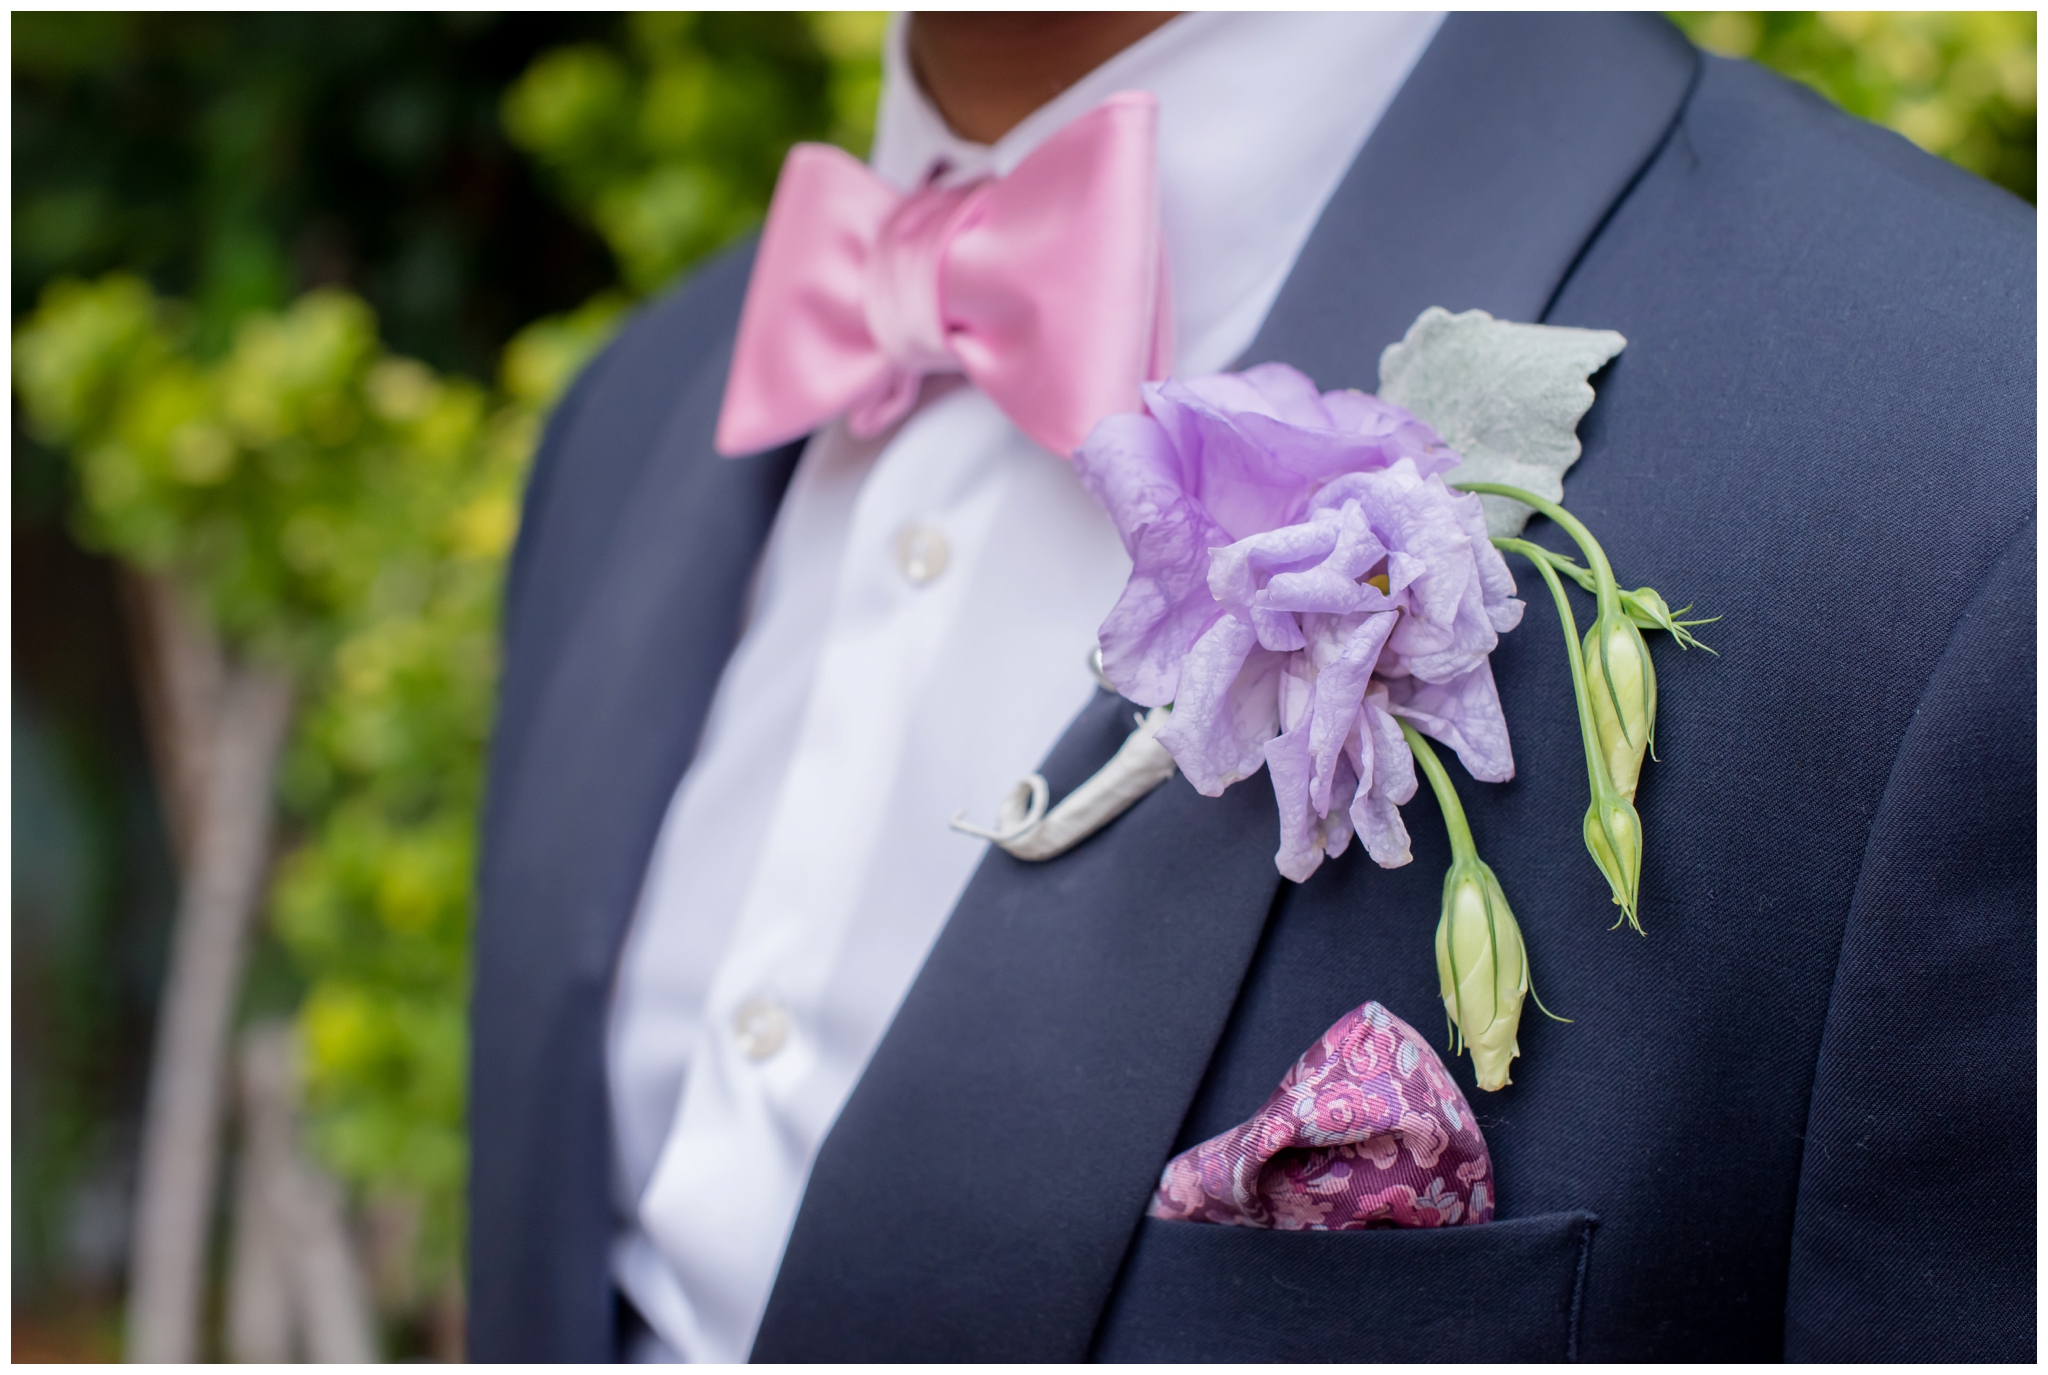 13 Wedding Prep Tips for the Groom and Groomsmen - Laura Lee Photography